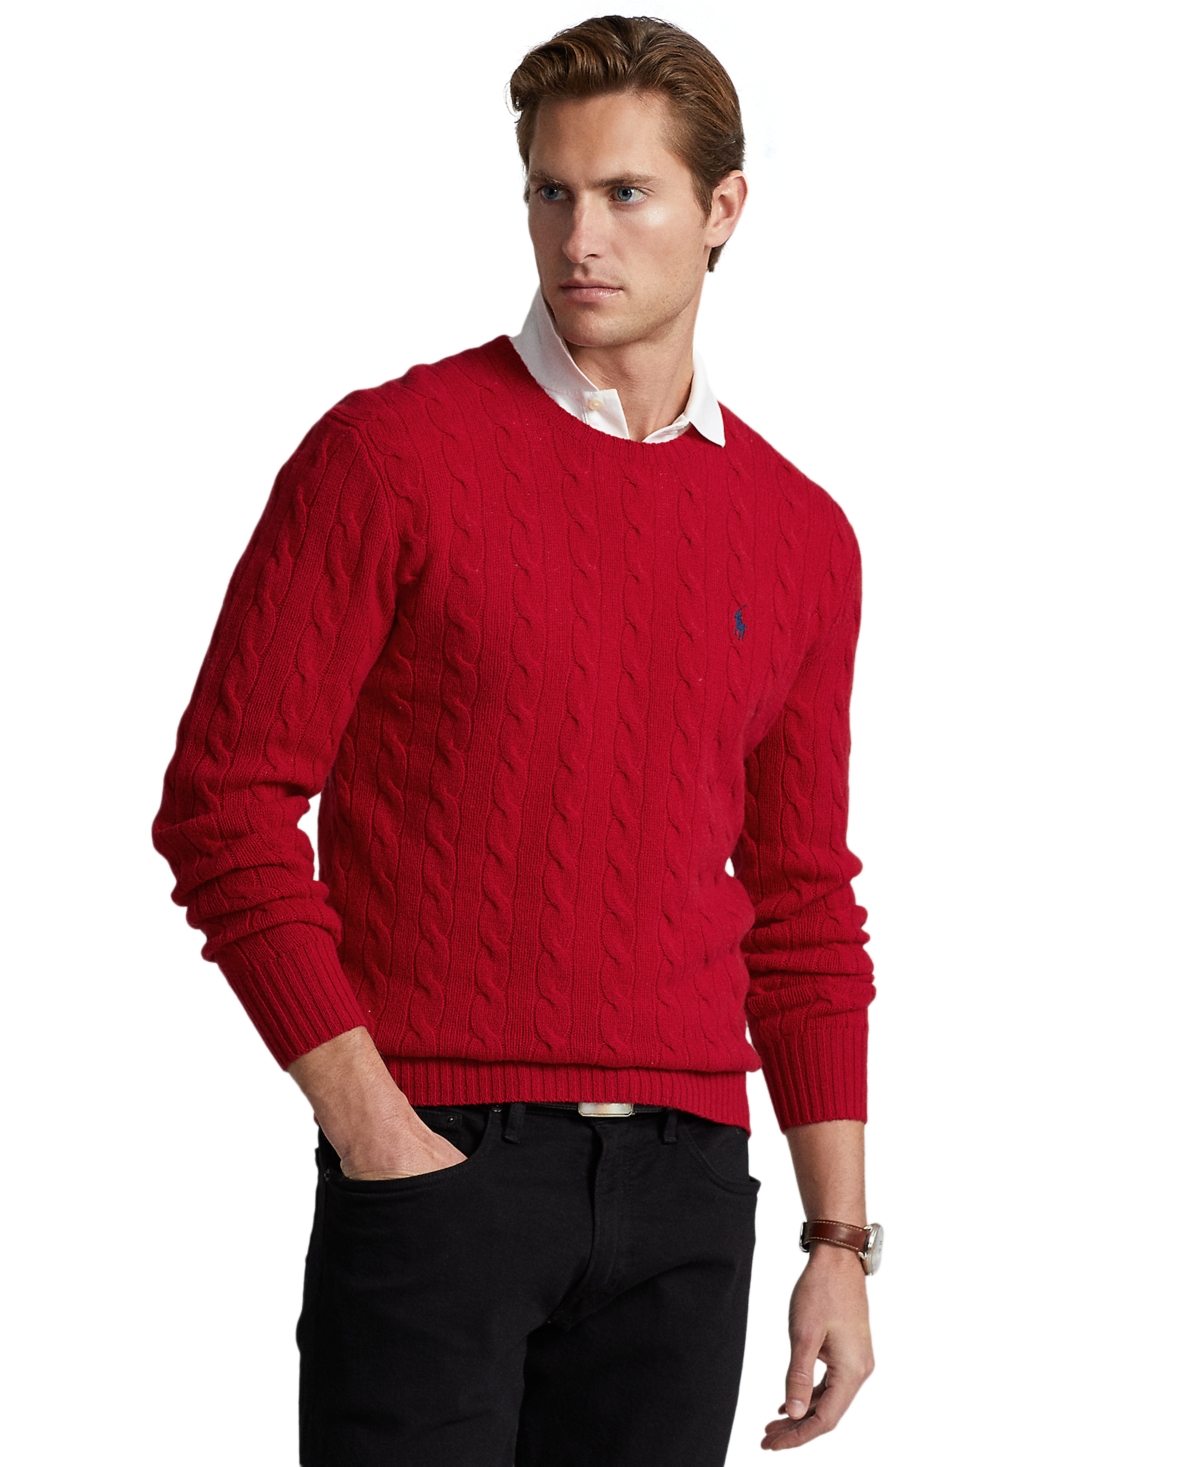 POLO RALPH LAUREN MEN'S WOOL-CASHMERE CABLE-KNIT SWEATER